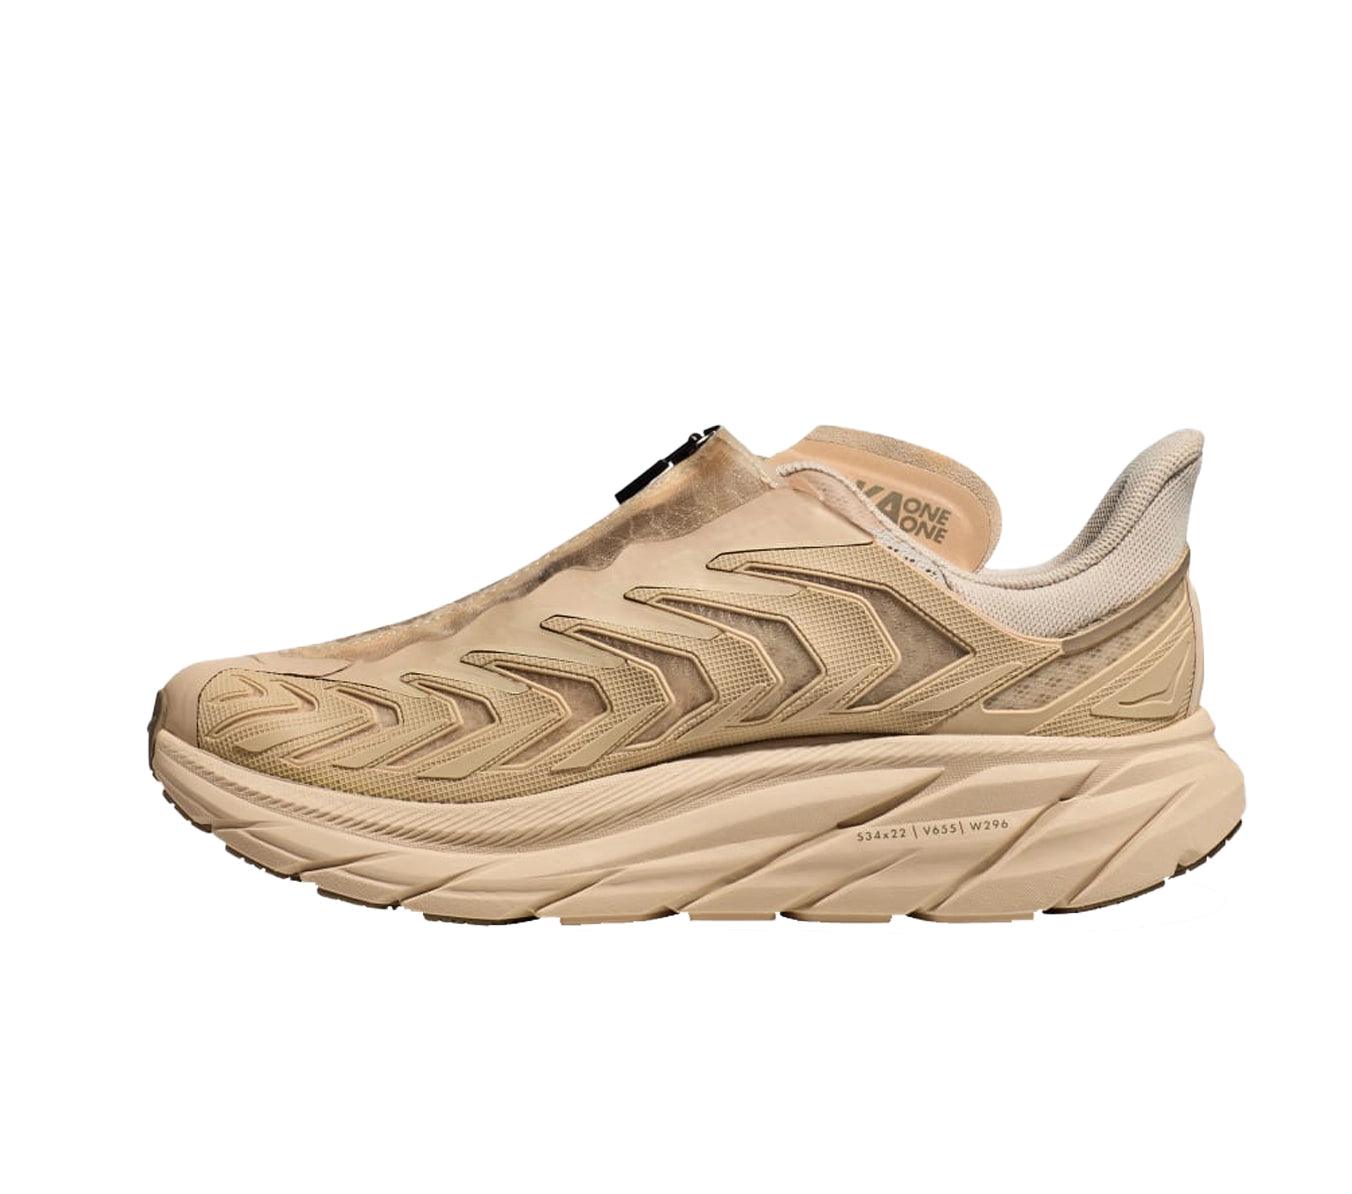 Hoka One One Project Clifton - Shifting Sand / Dune - Shoes